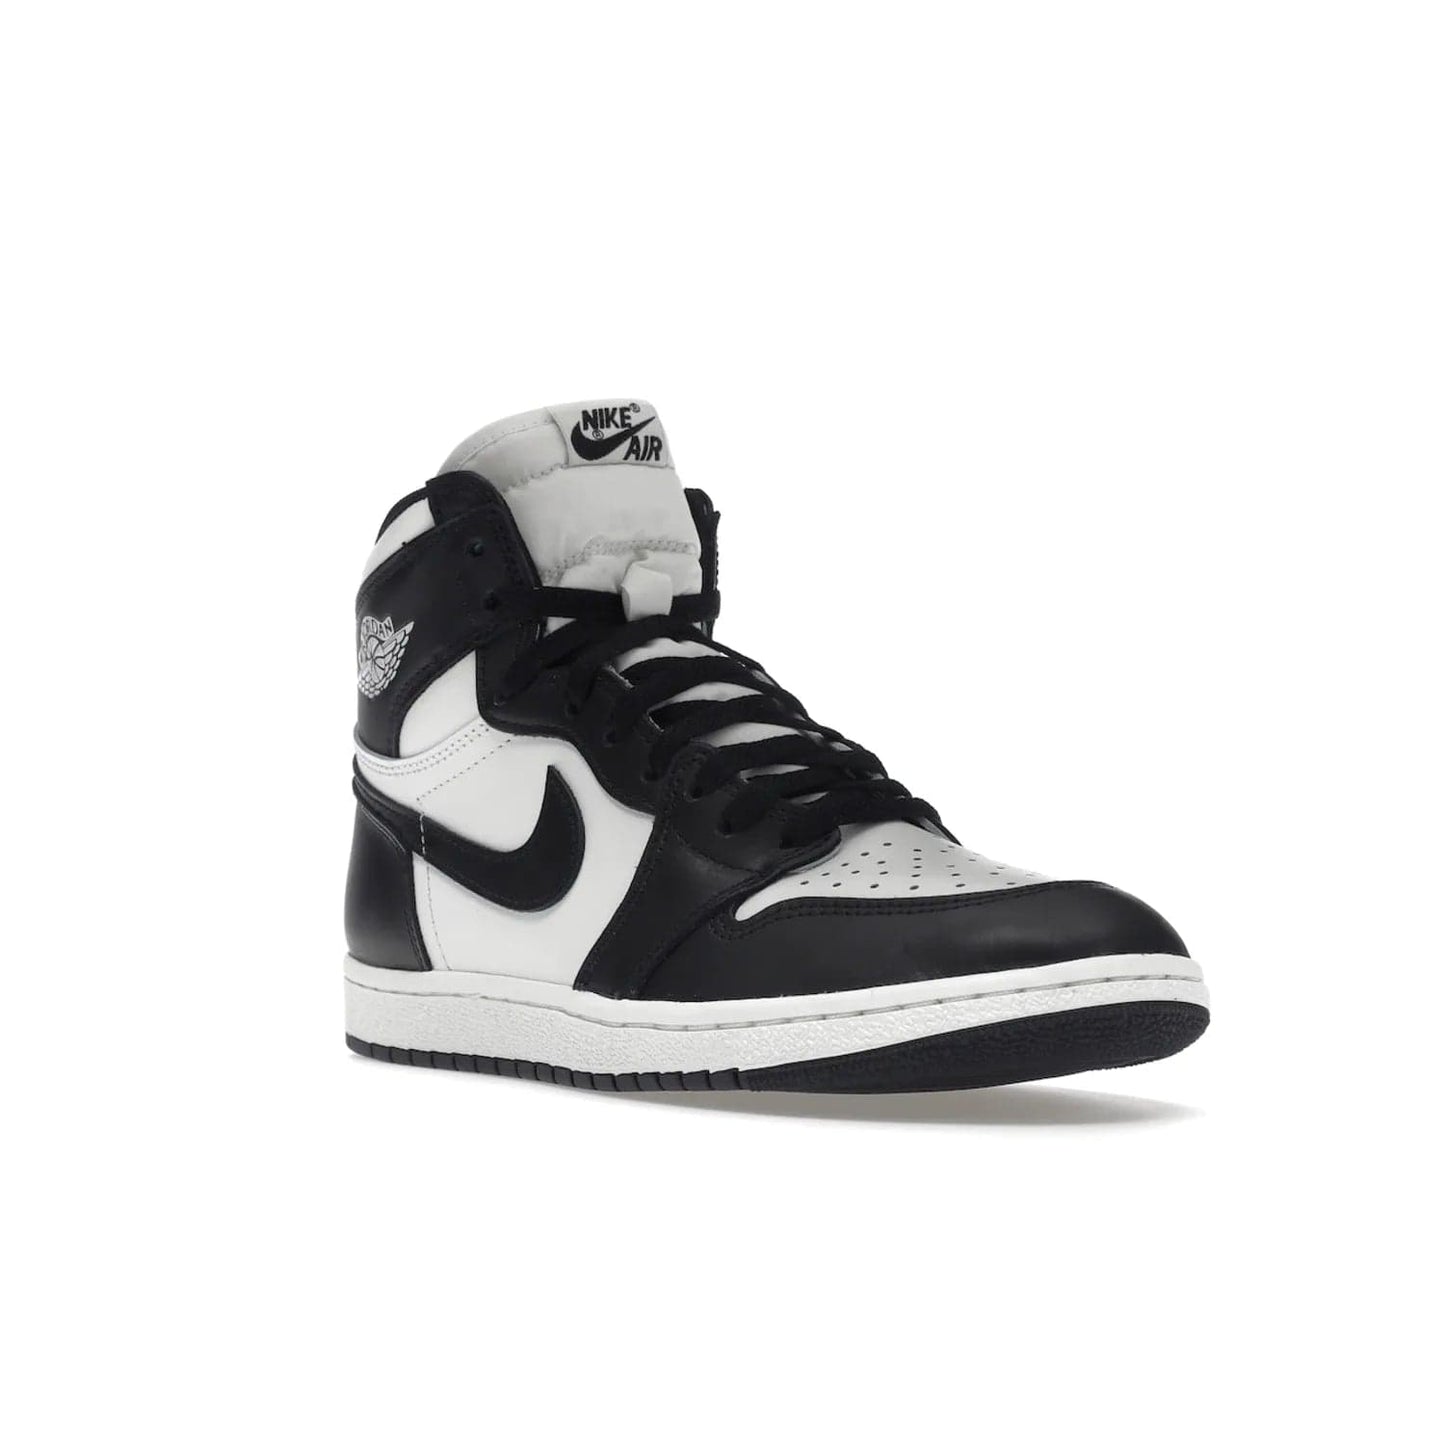 Jordan 1 Retro High 85 Black White (2023) - Image 6 - Only at www.BallersClubKickz.com - Brand new Jordan 1 Retro High 85 Black White (2023) now available. A classic color scheme of black and white leather uppers with signature Nike Air logo on the tongue. Must-have for any Air Jordan fan. Available February 15, 2023.